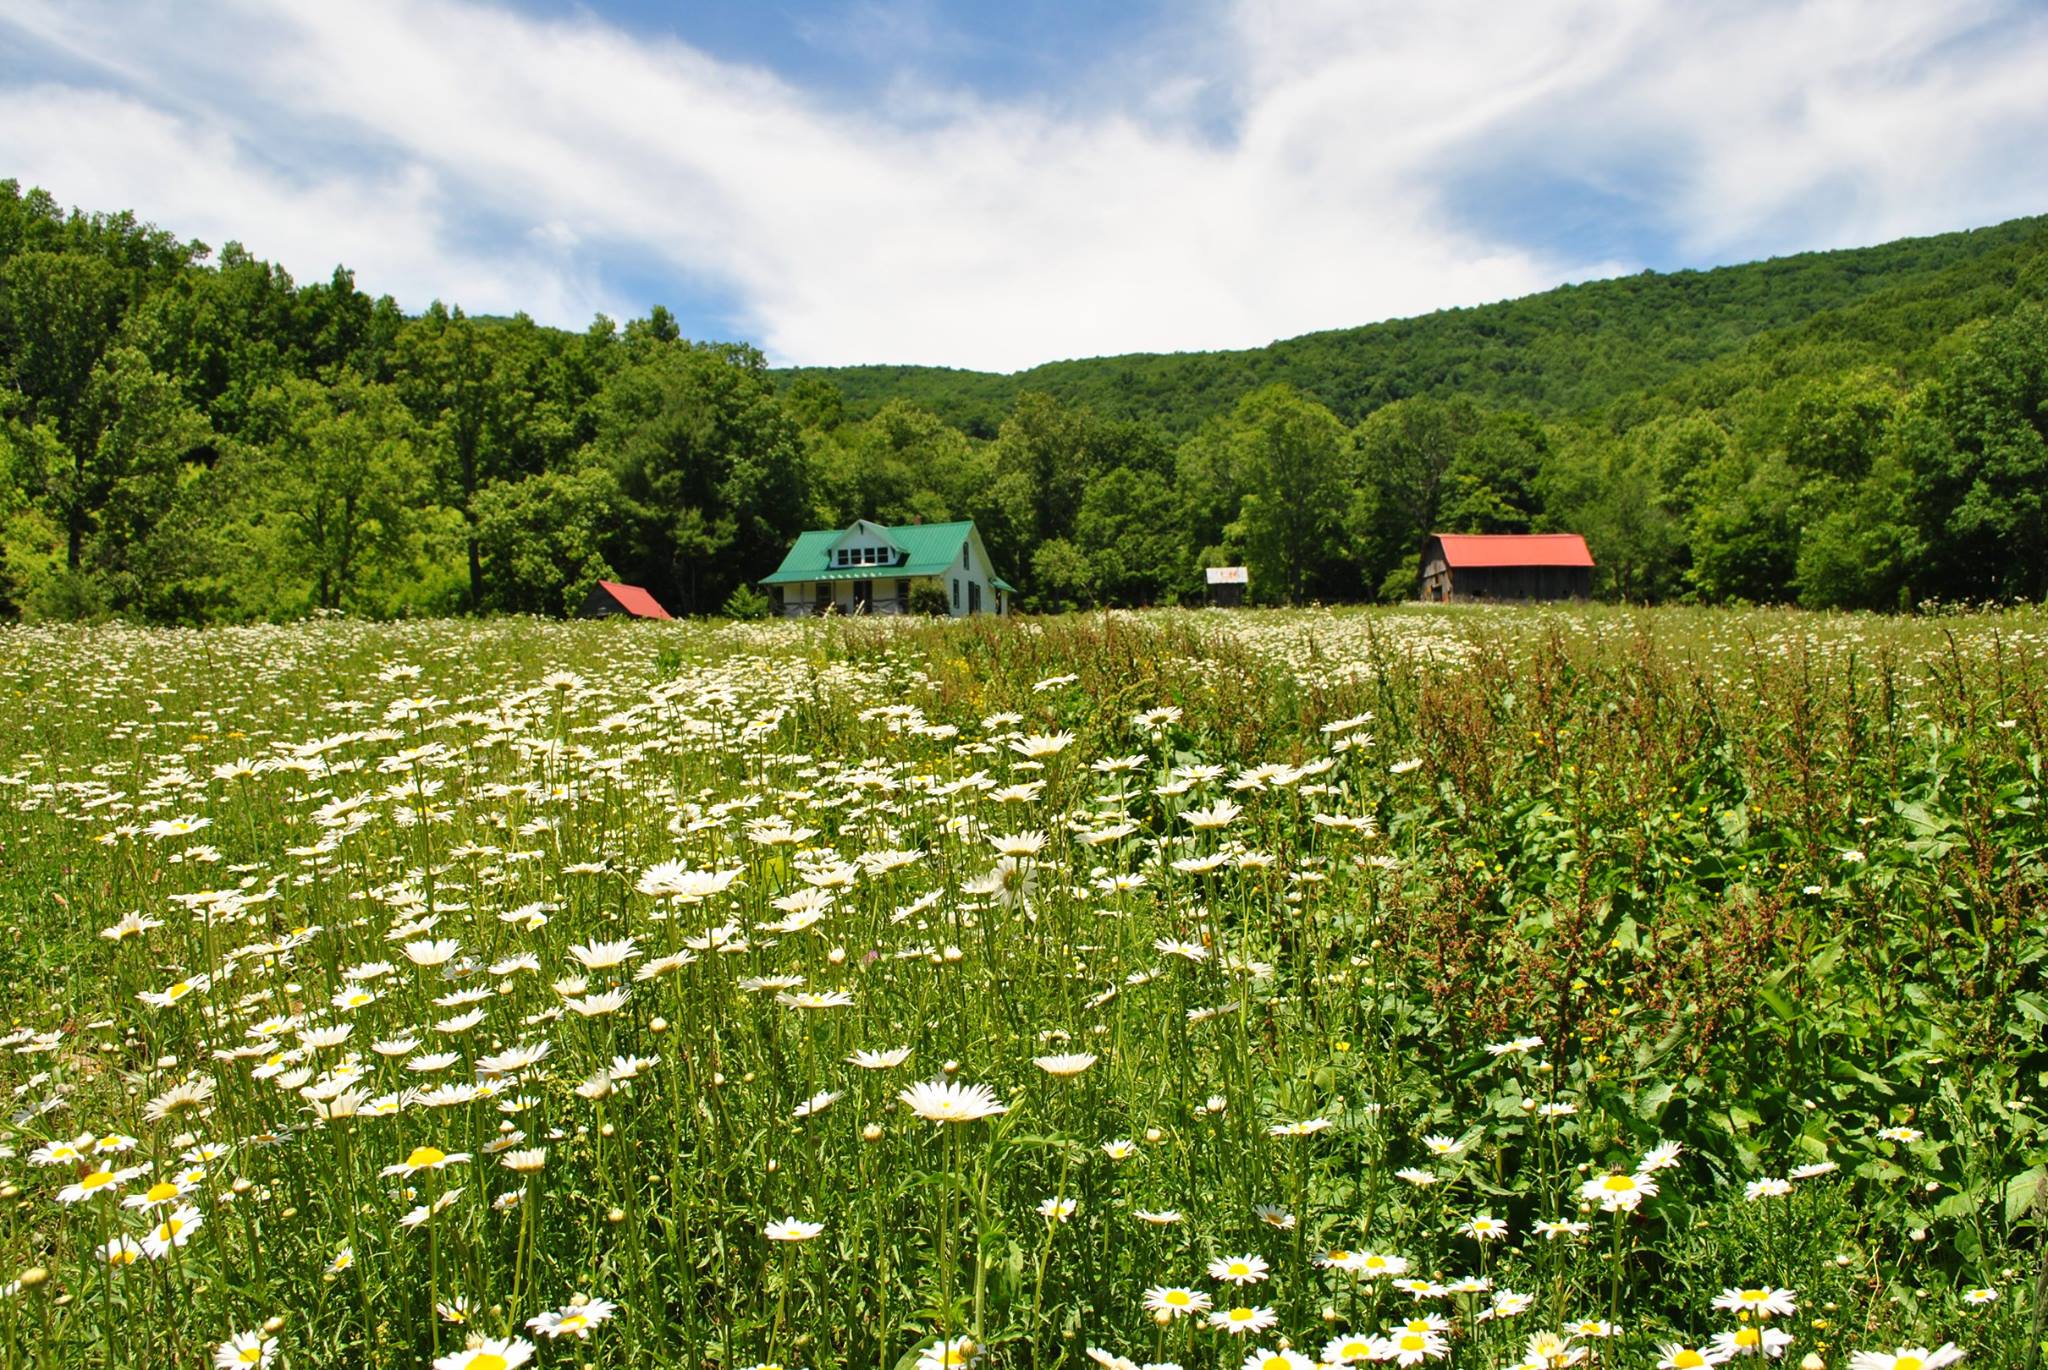 Summer daisies adorn the pasture which is the Pioneer Homestead's front yard